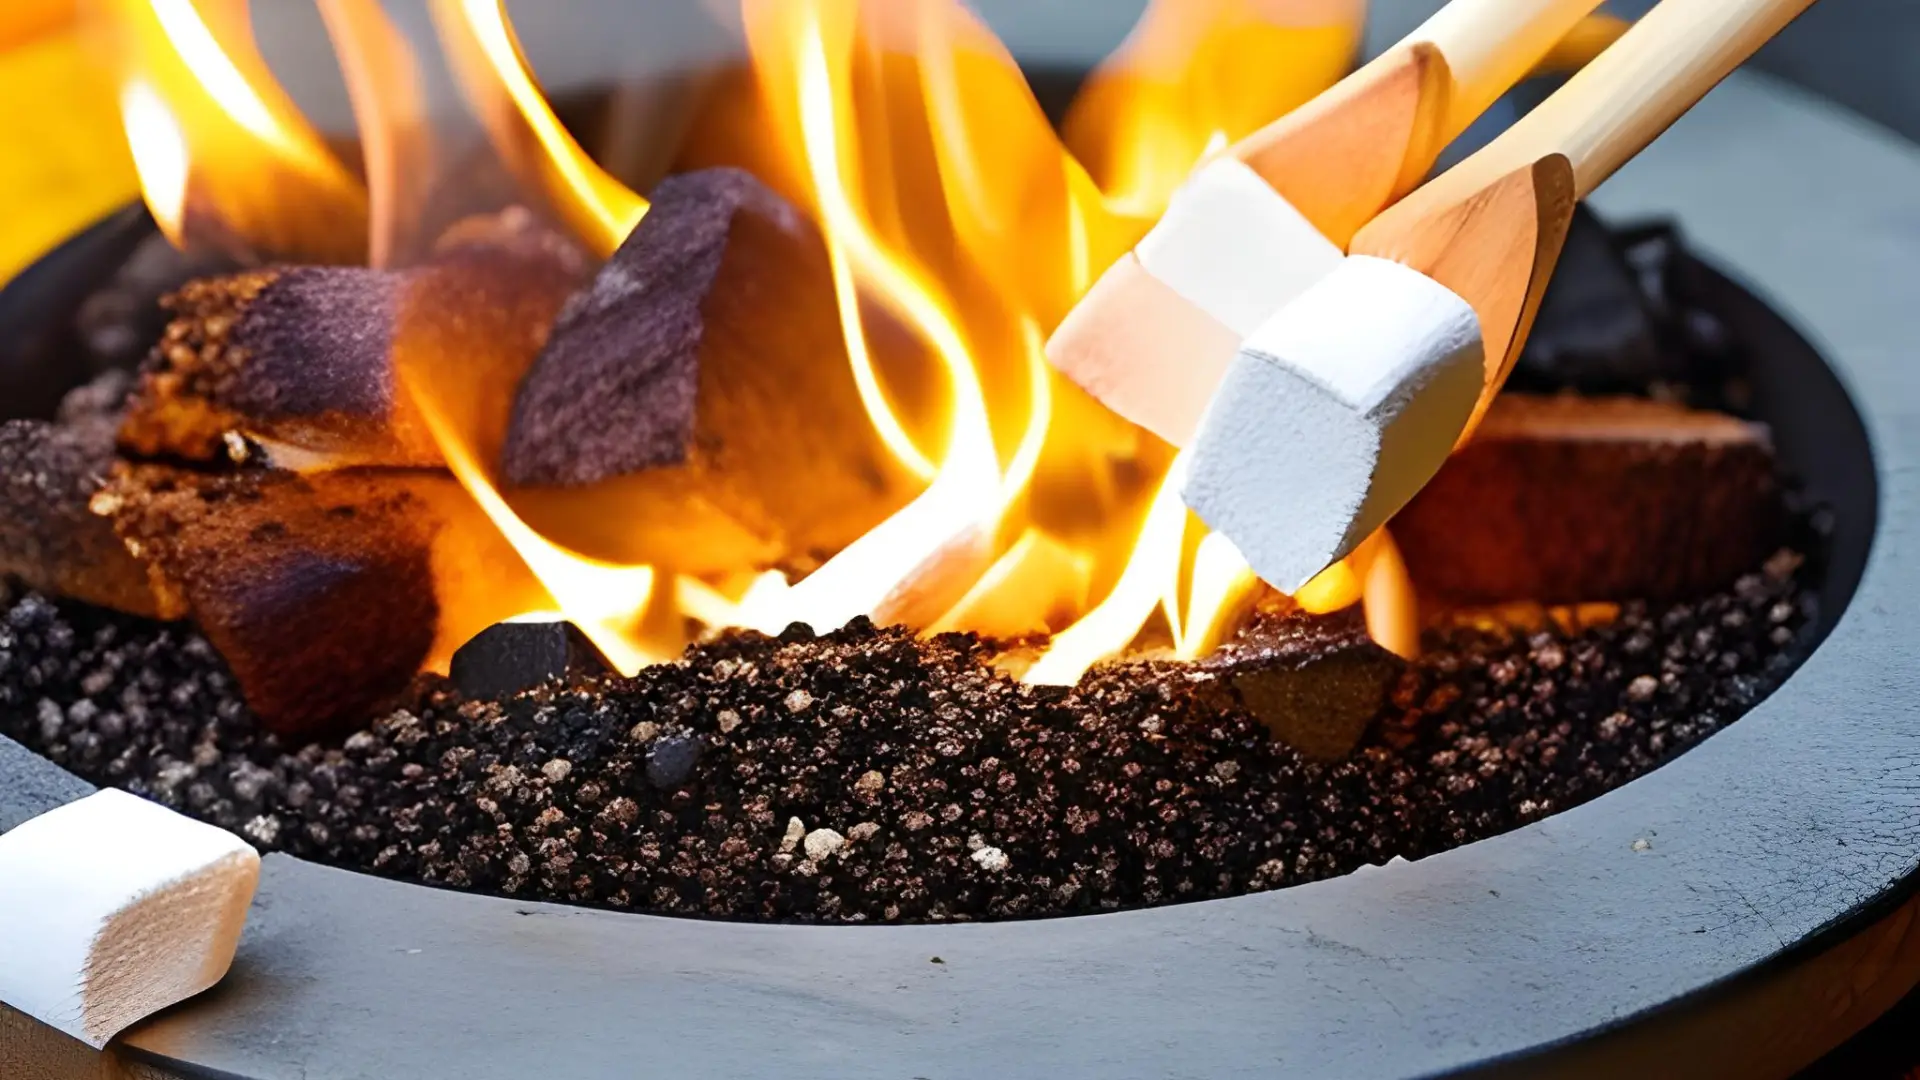 Can you roast marshmallows with wooden skewers?